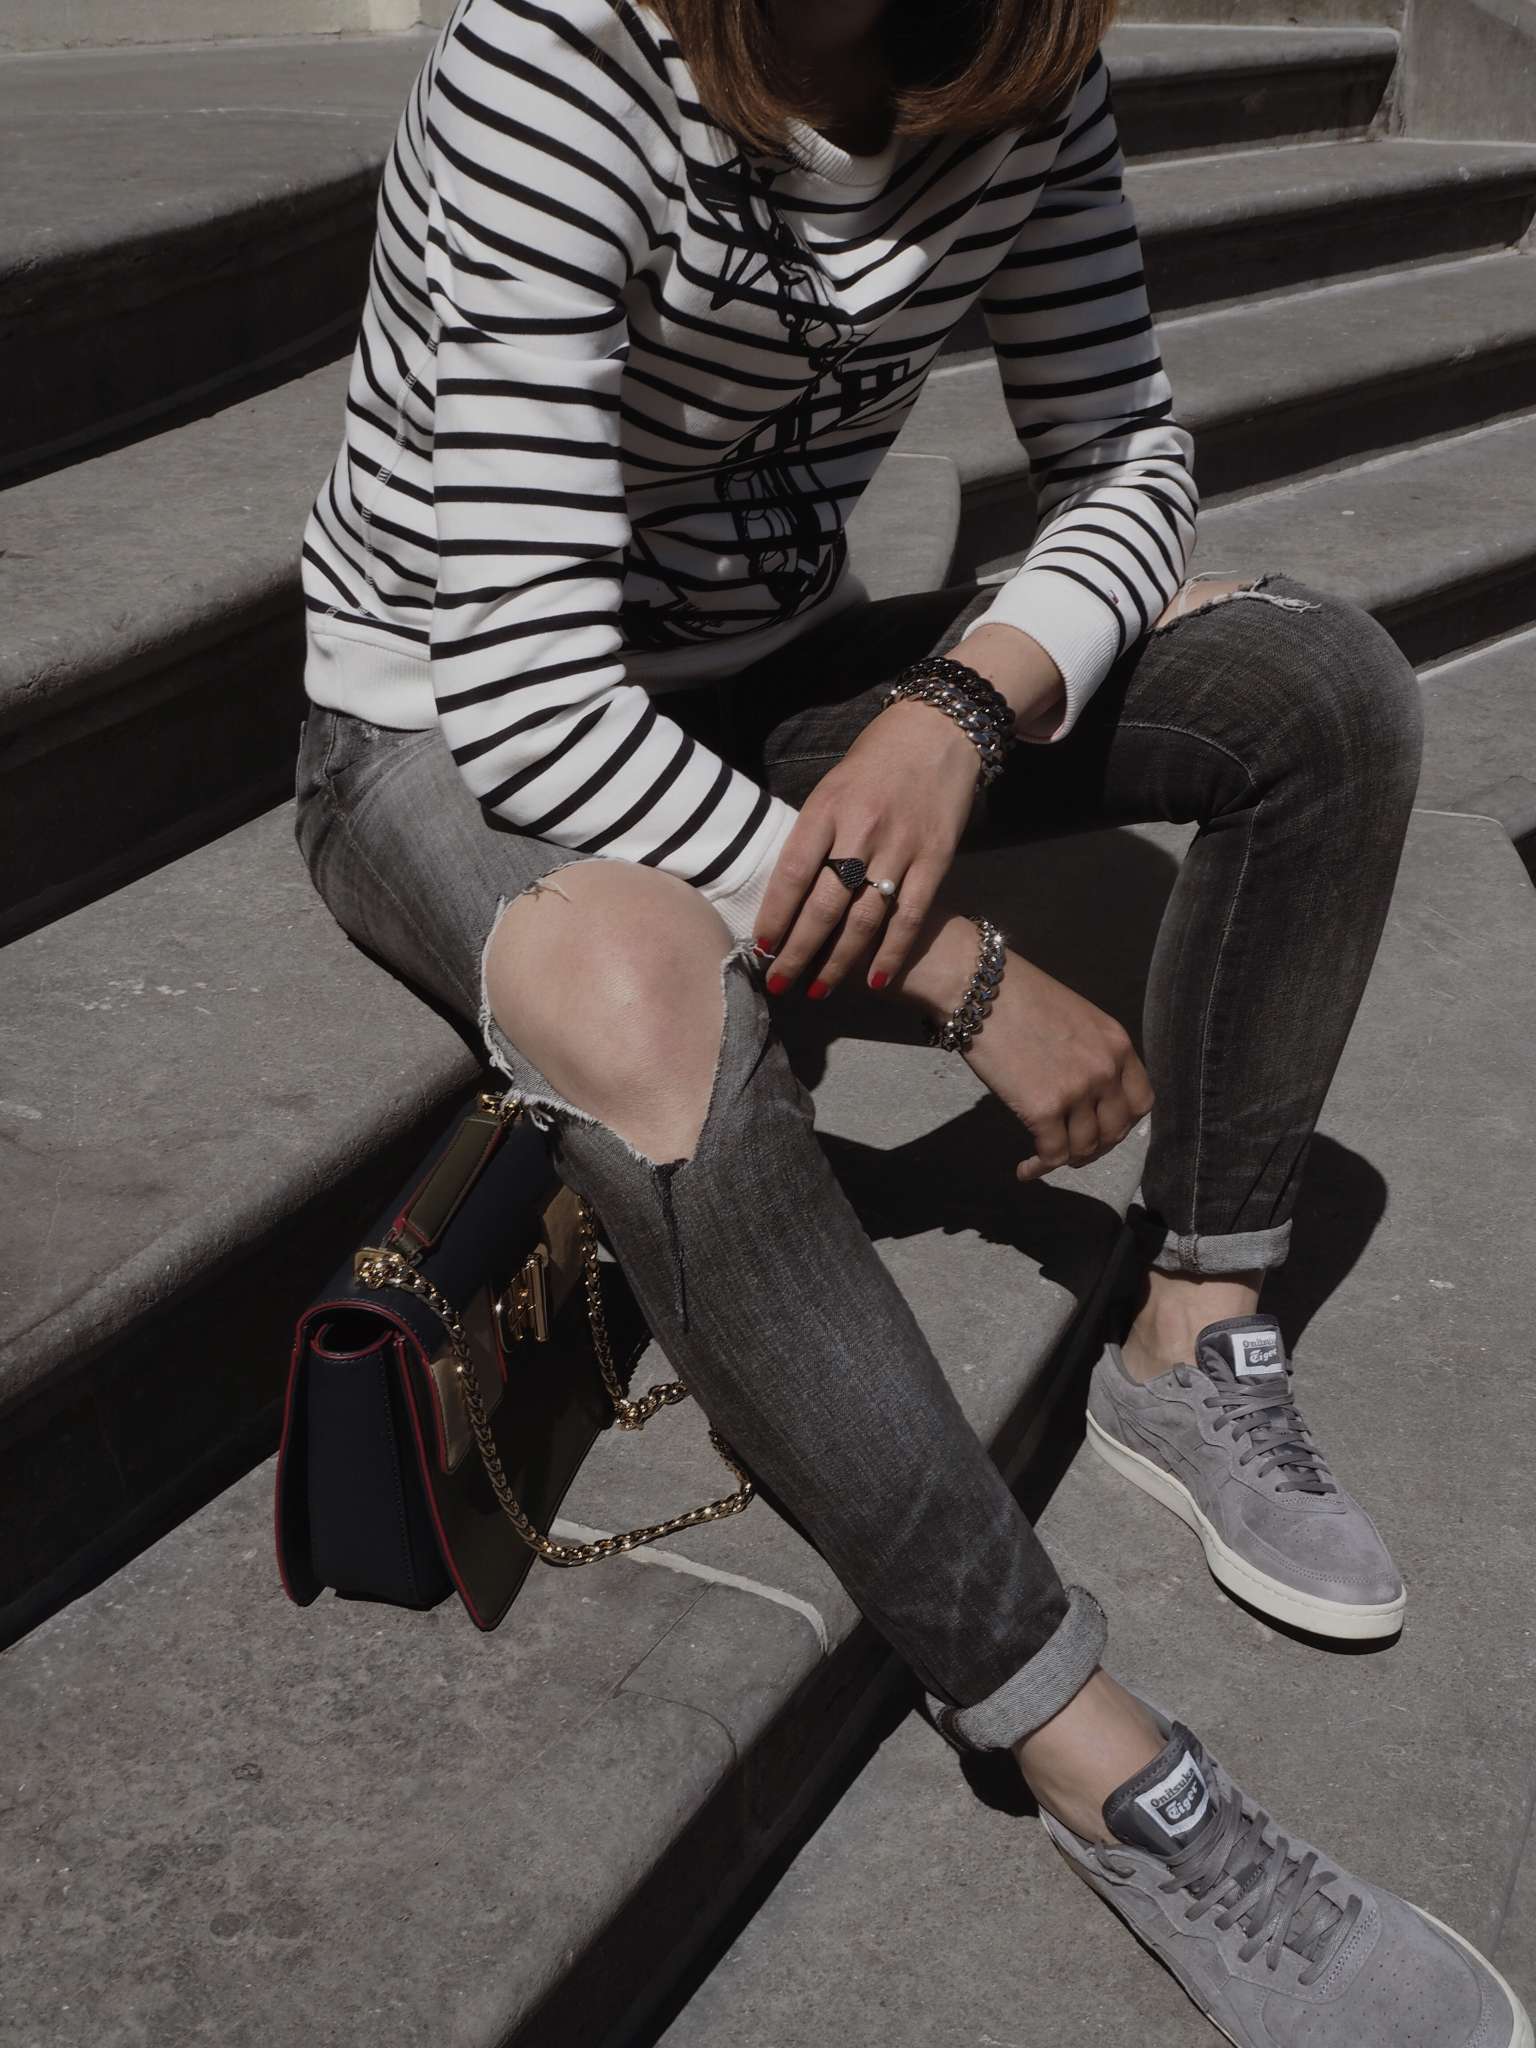 citizen-of-humanity-colmar-crossover-bag-grey-jeans-grey-sneakers-Jewelry-by-Ad-onitsuka-tiger-ripped-jeans-round-sunglasses-skinny-jeans-stripes-sweater-the-rubs-tommy-hilfiger-zero-uv